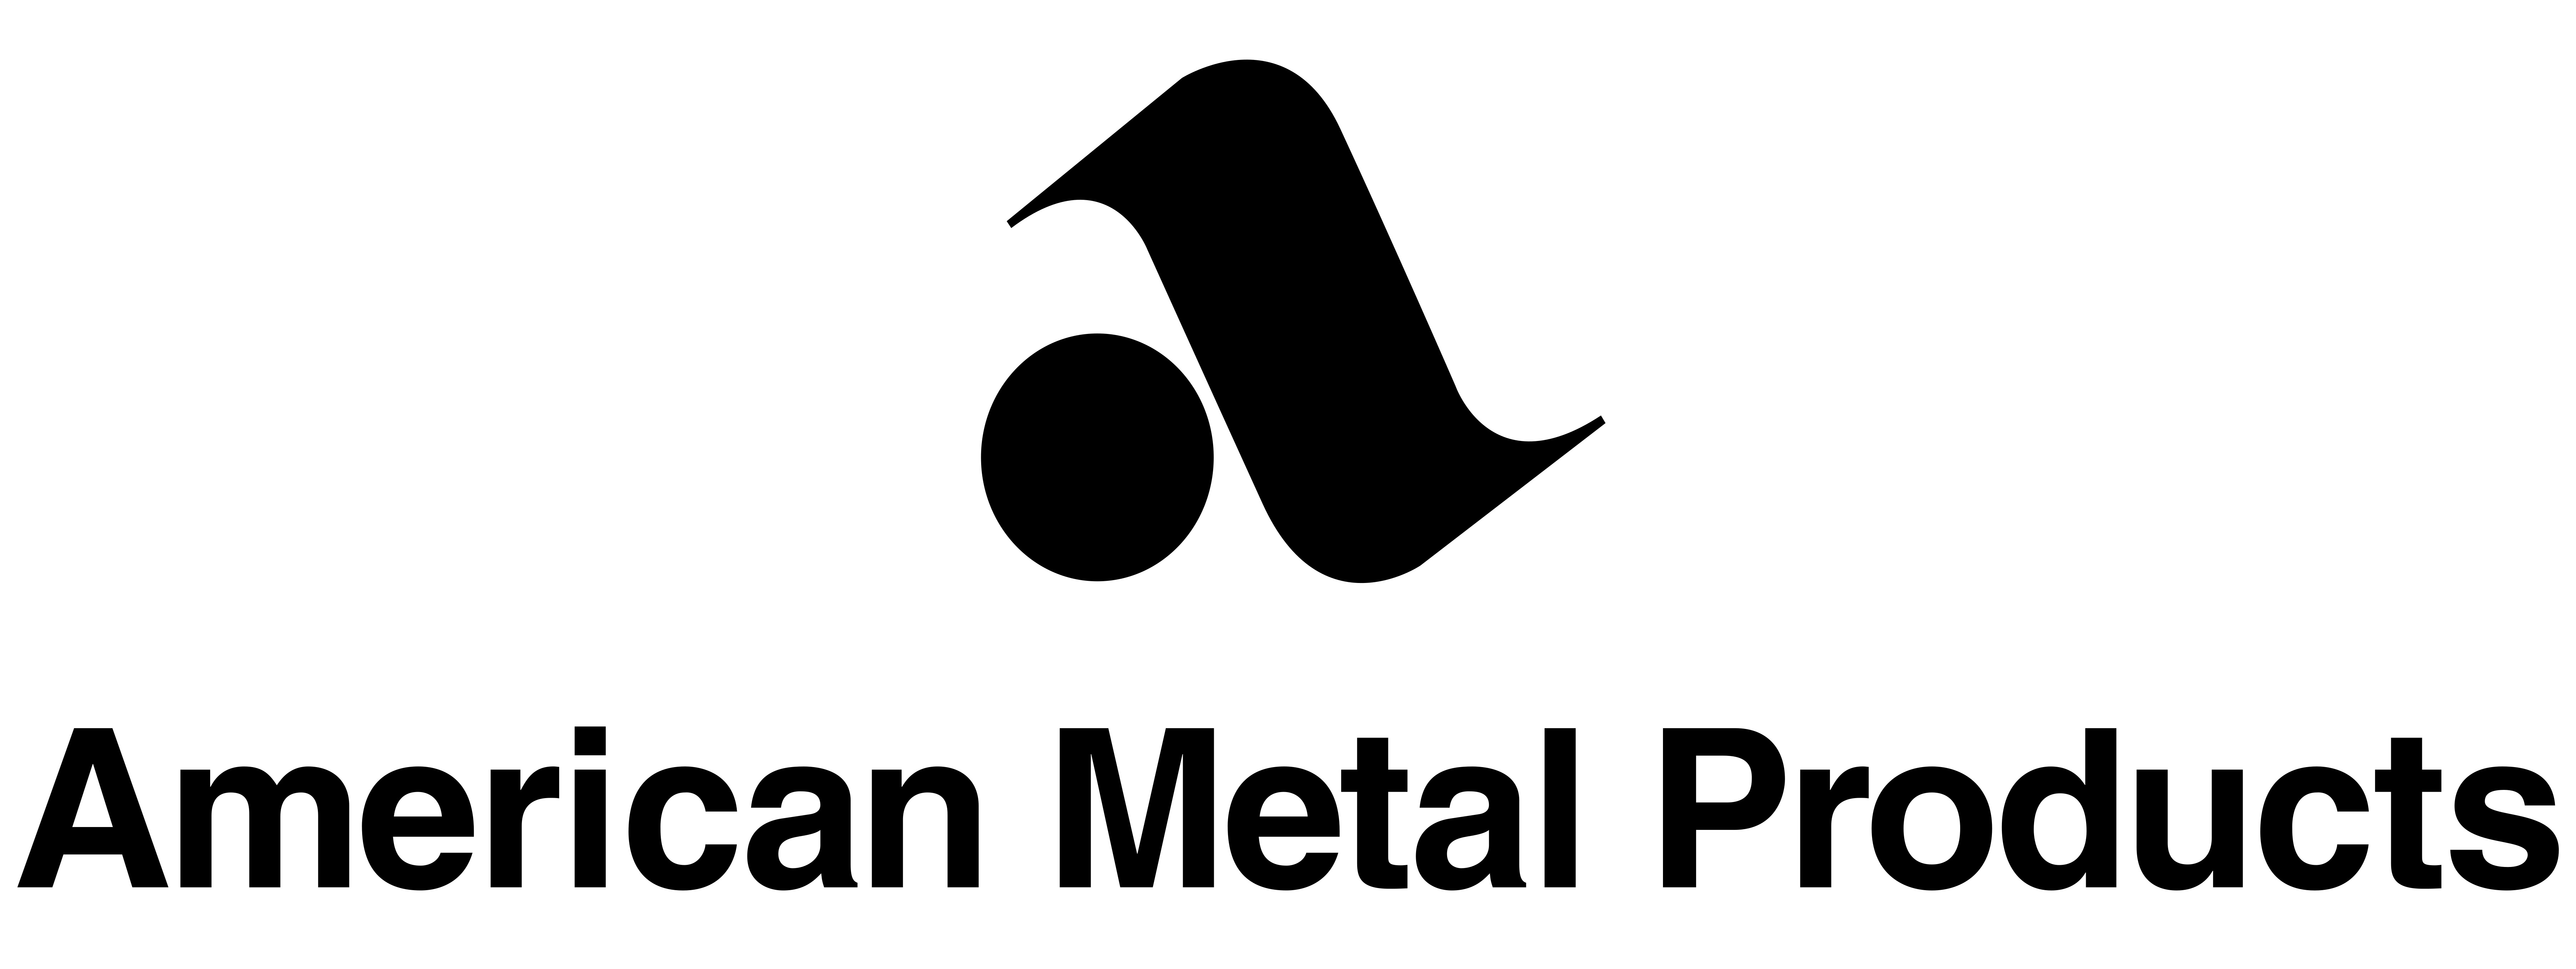 american-metal-products